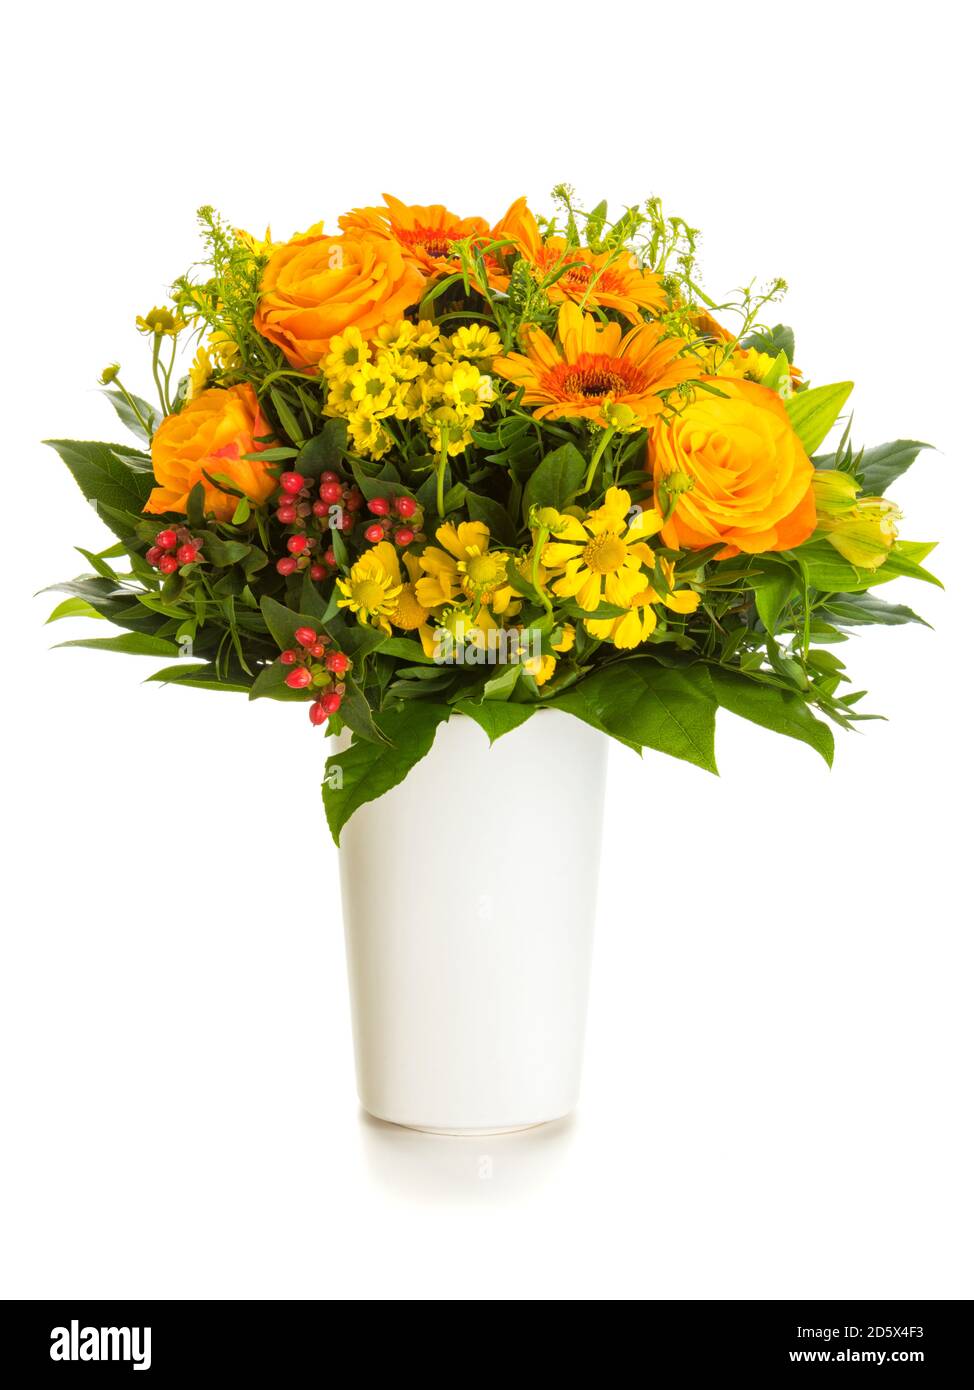 Autumnal flowers bouquet with yellow and orange helenium, rose and gerber blossoms and myrtles in vase isolated on white background Stock Photo